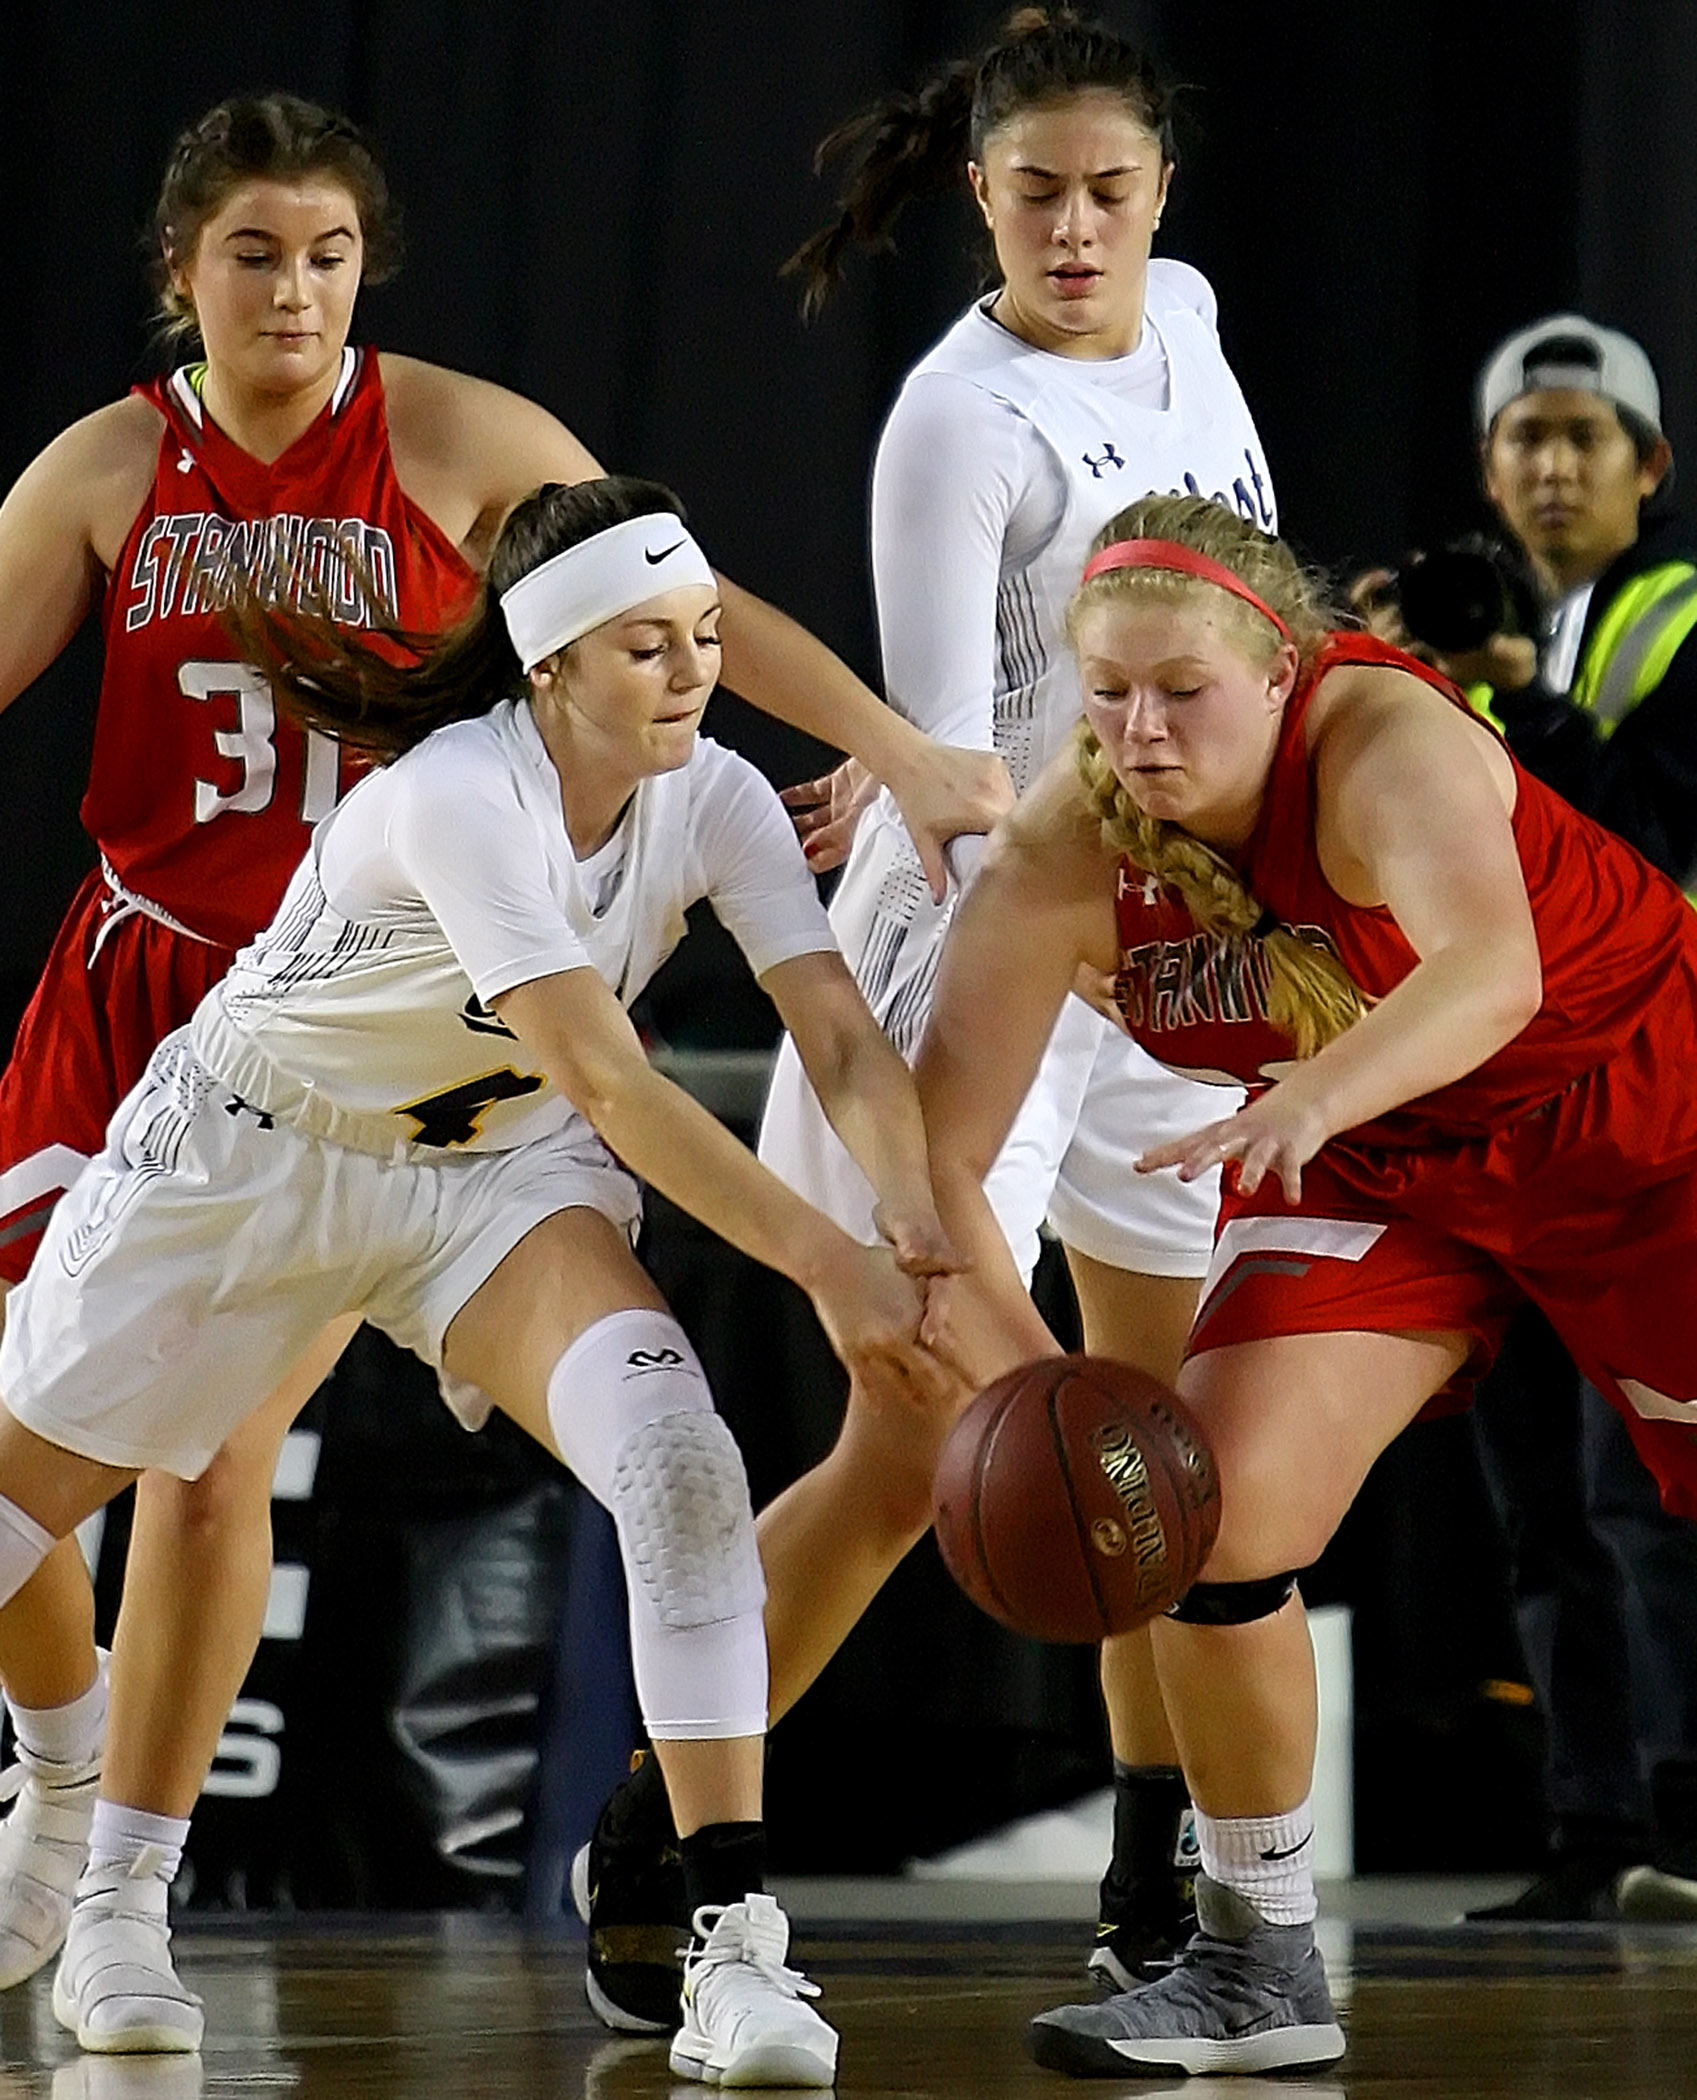 Kelsey Lenzie of West Seattle and Stanwood's Kaitlin Larson go after a loose ball.